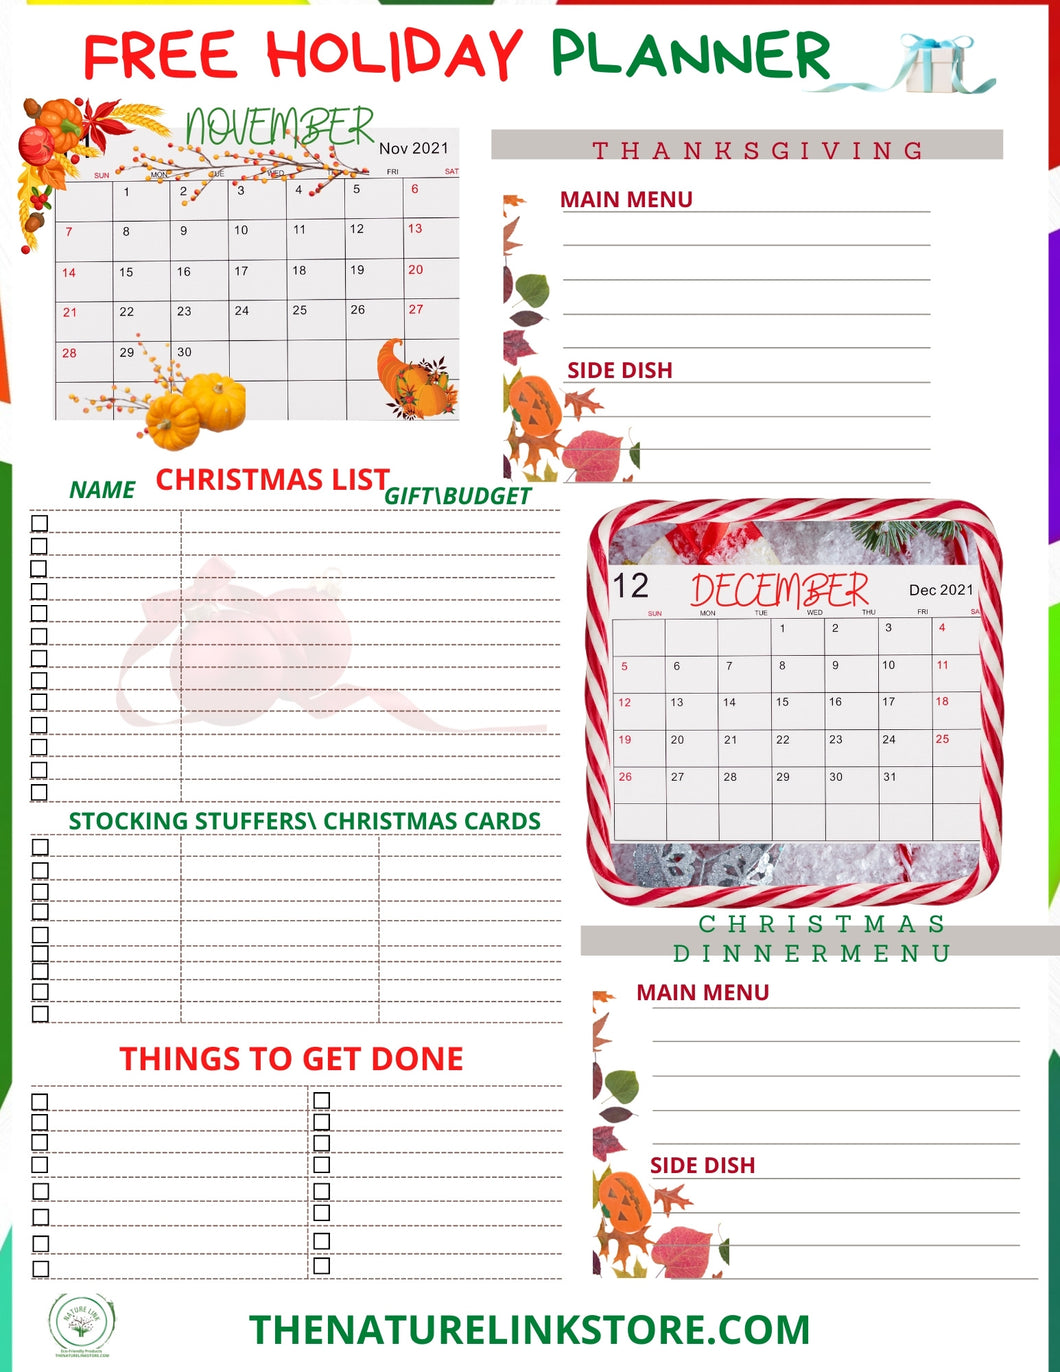 Holiday Planner Free How to plan for the Holidays PDF or JPG Format